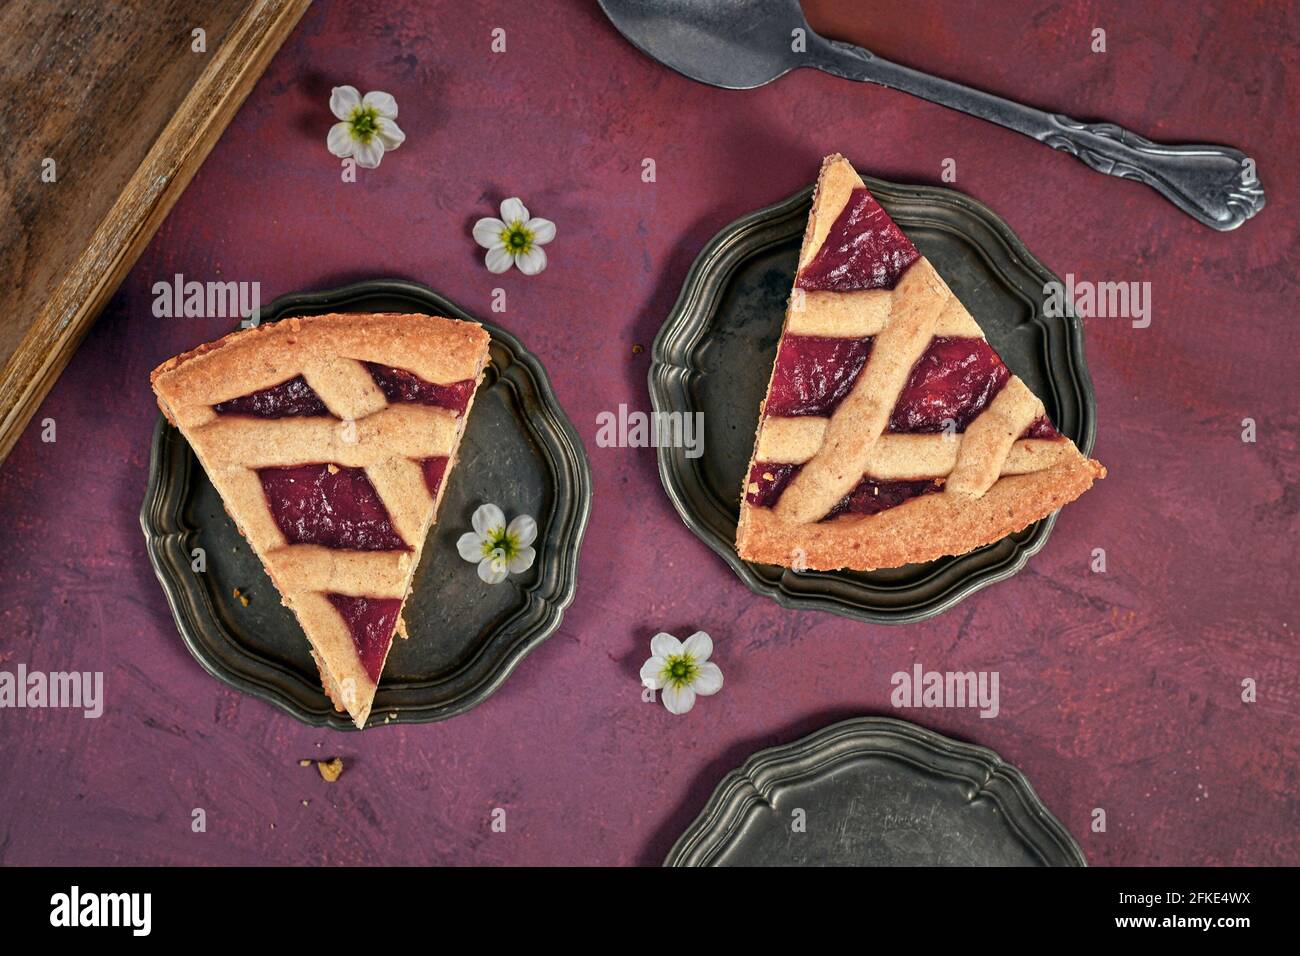 Slices of pie called 'Linzer Torte', a traditional Austrian shortcake pastry topped with fruit preserves and sliced nuts with lattice design Stock Photo